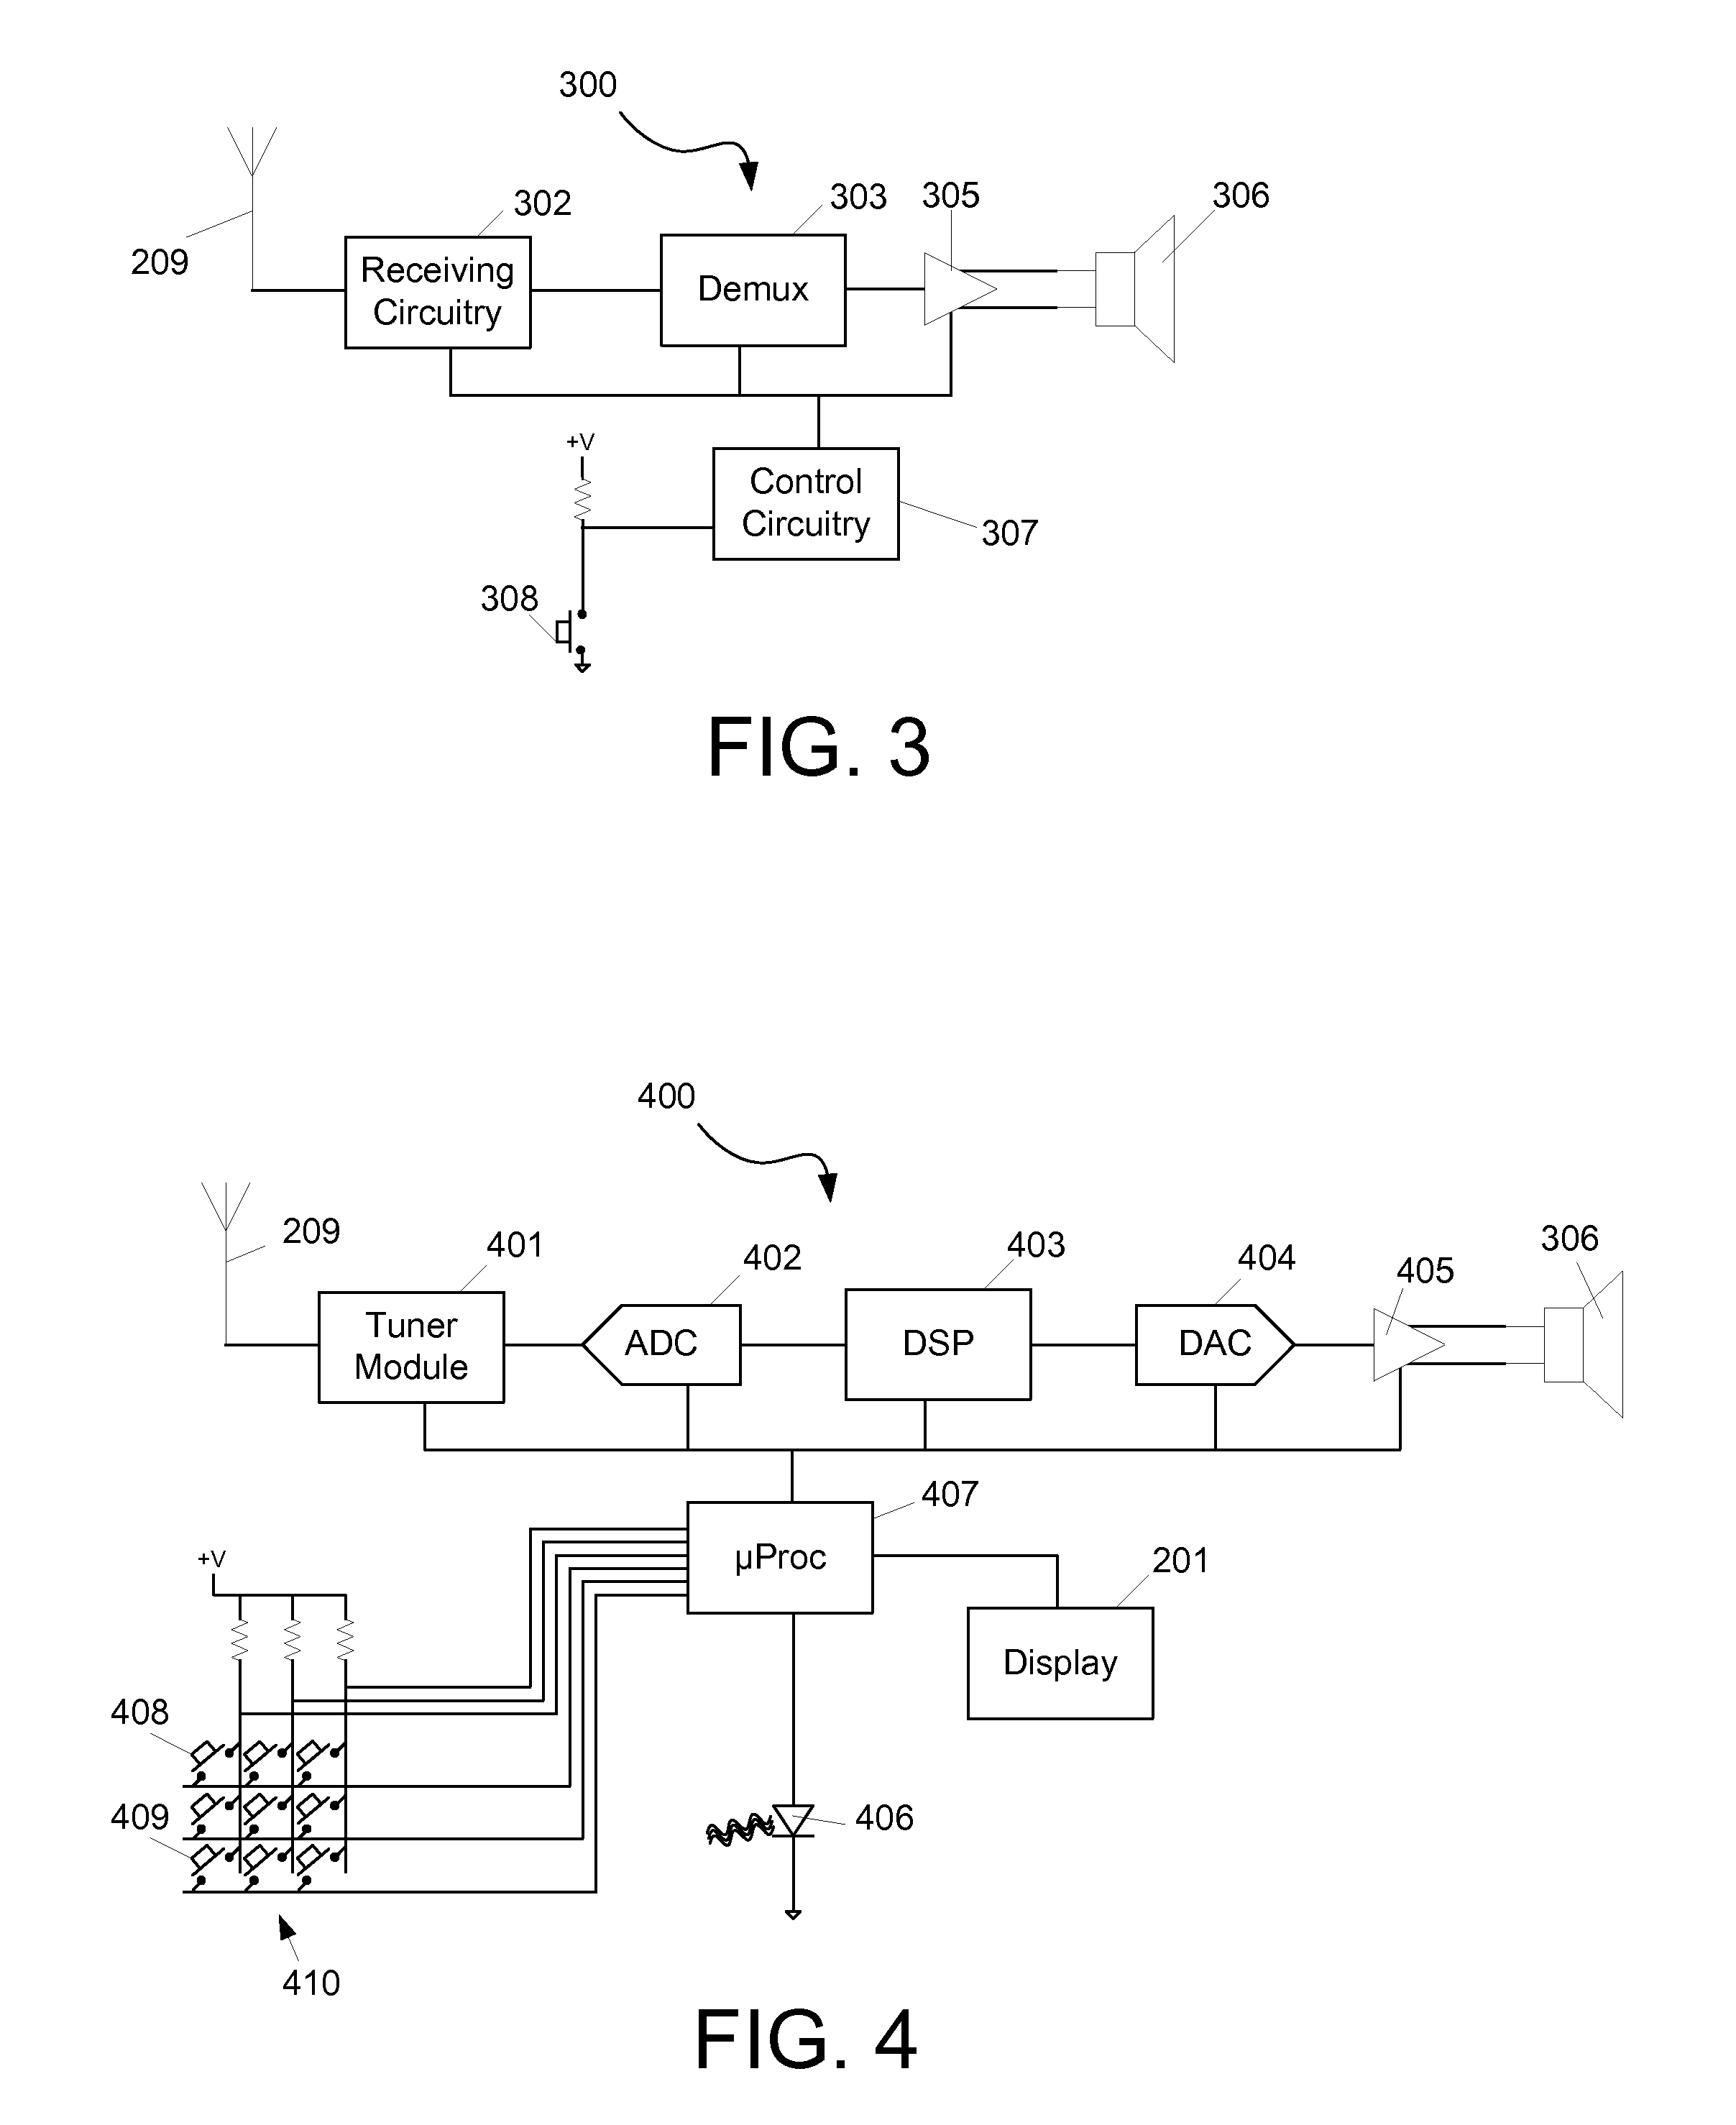 Method and Apparatus for Scanning for Digital Subchannels in a Hybrid Analog/Digital Broadcast